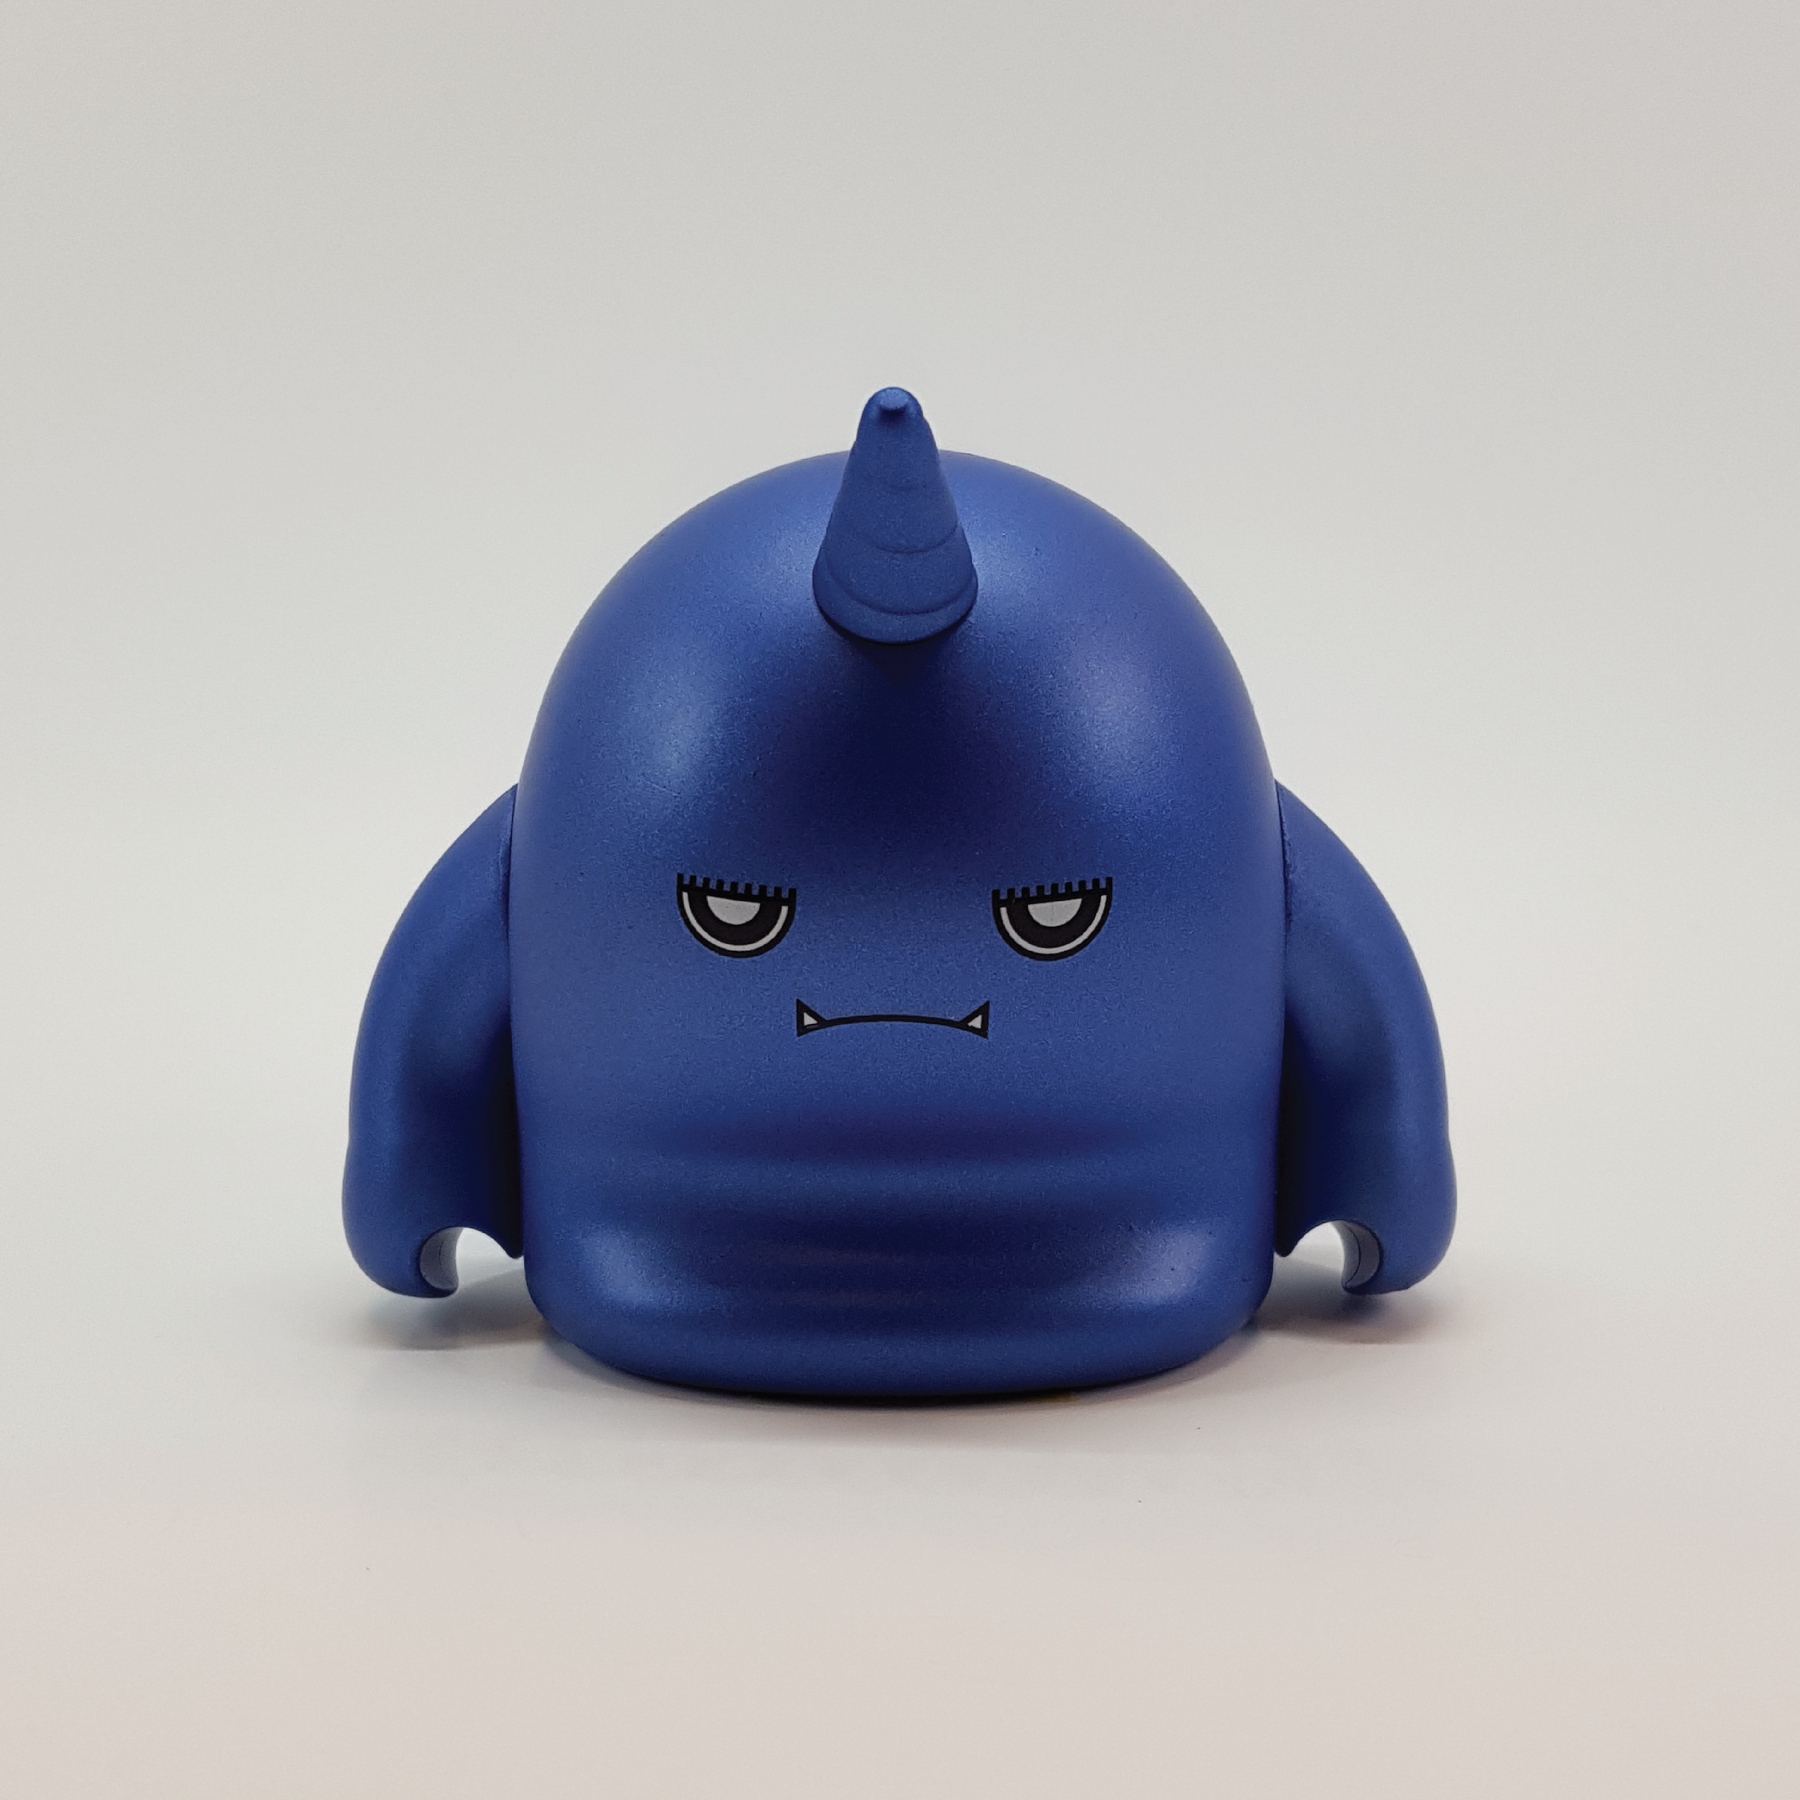 Unisaur Sadalite Blue 3-inch art toy by C-Concept Studio Available Now ! ! !